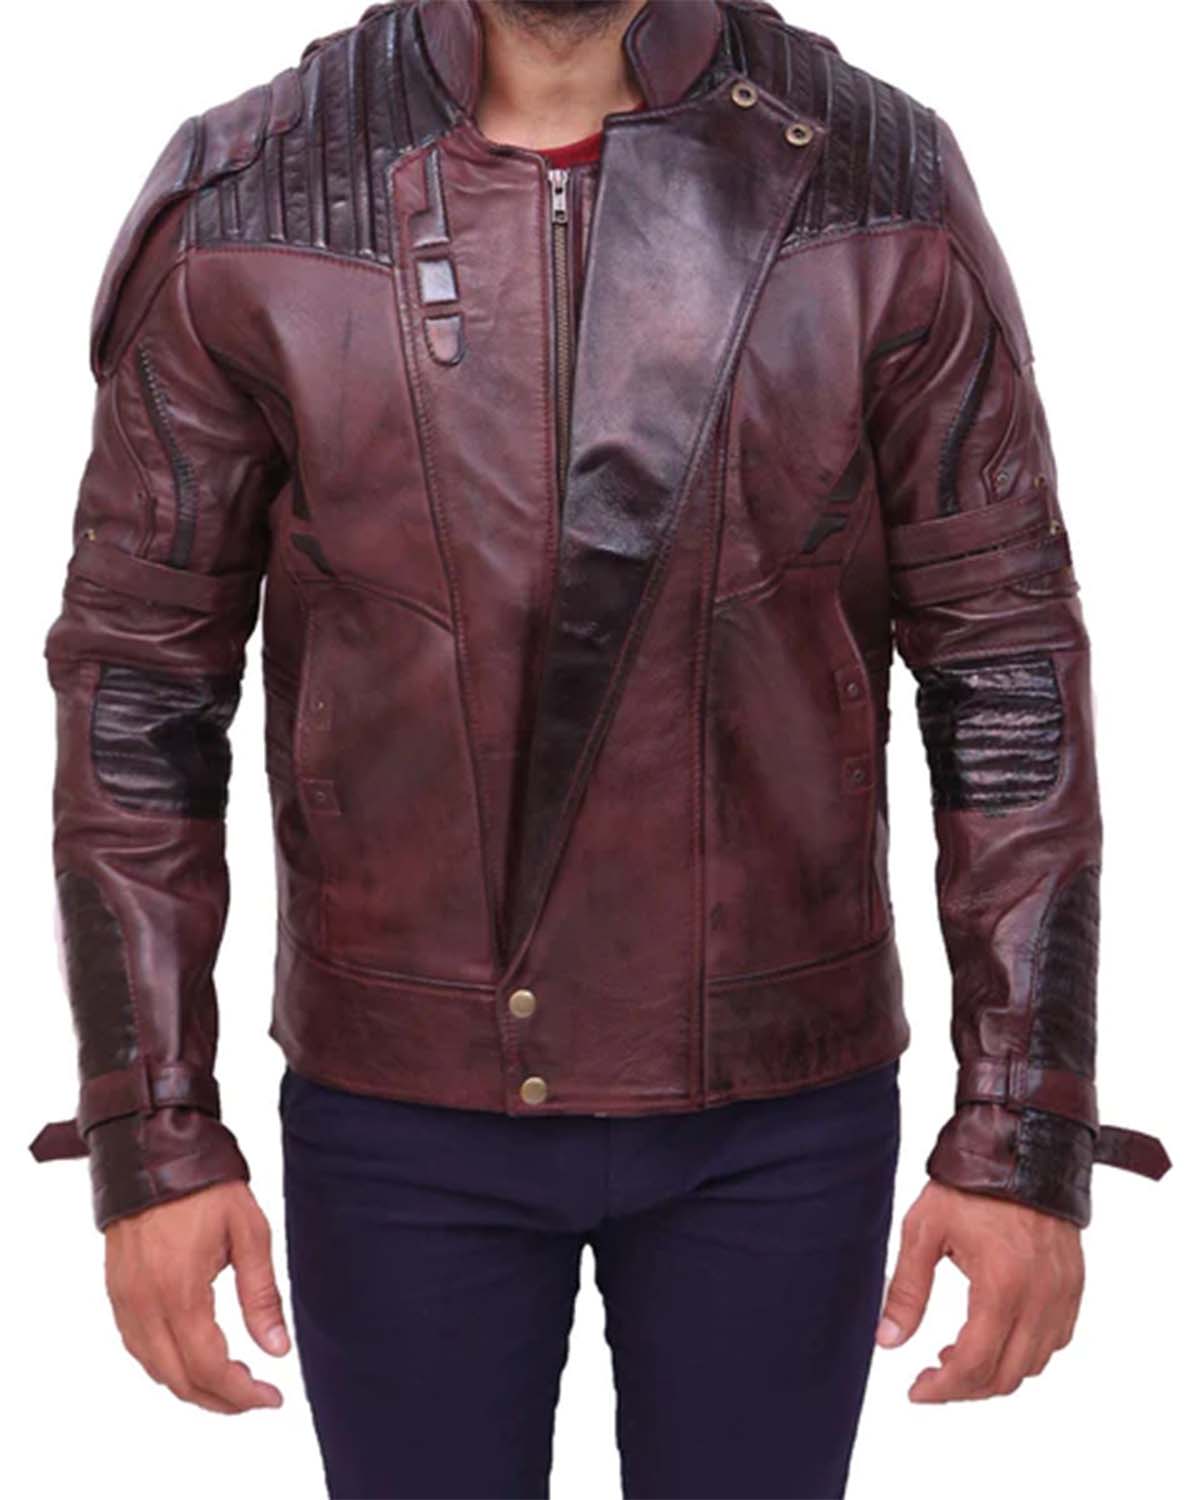 Elite Guardians Of The Galaxy 2 Star Lord Jacket